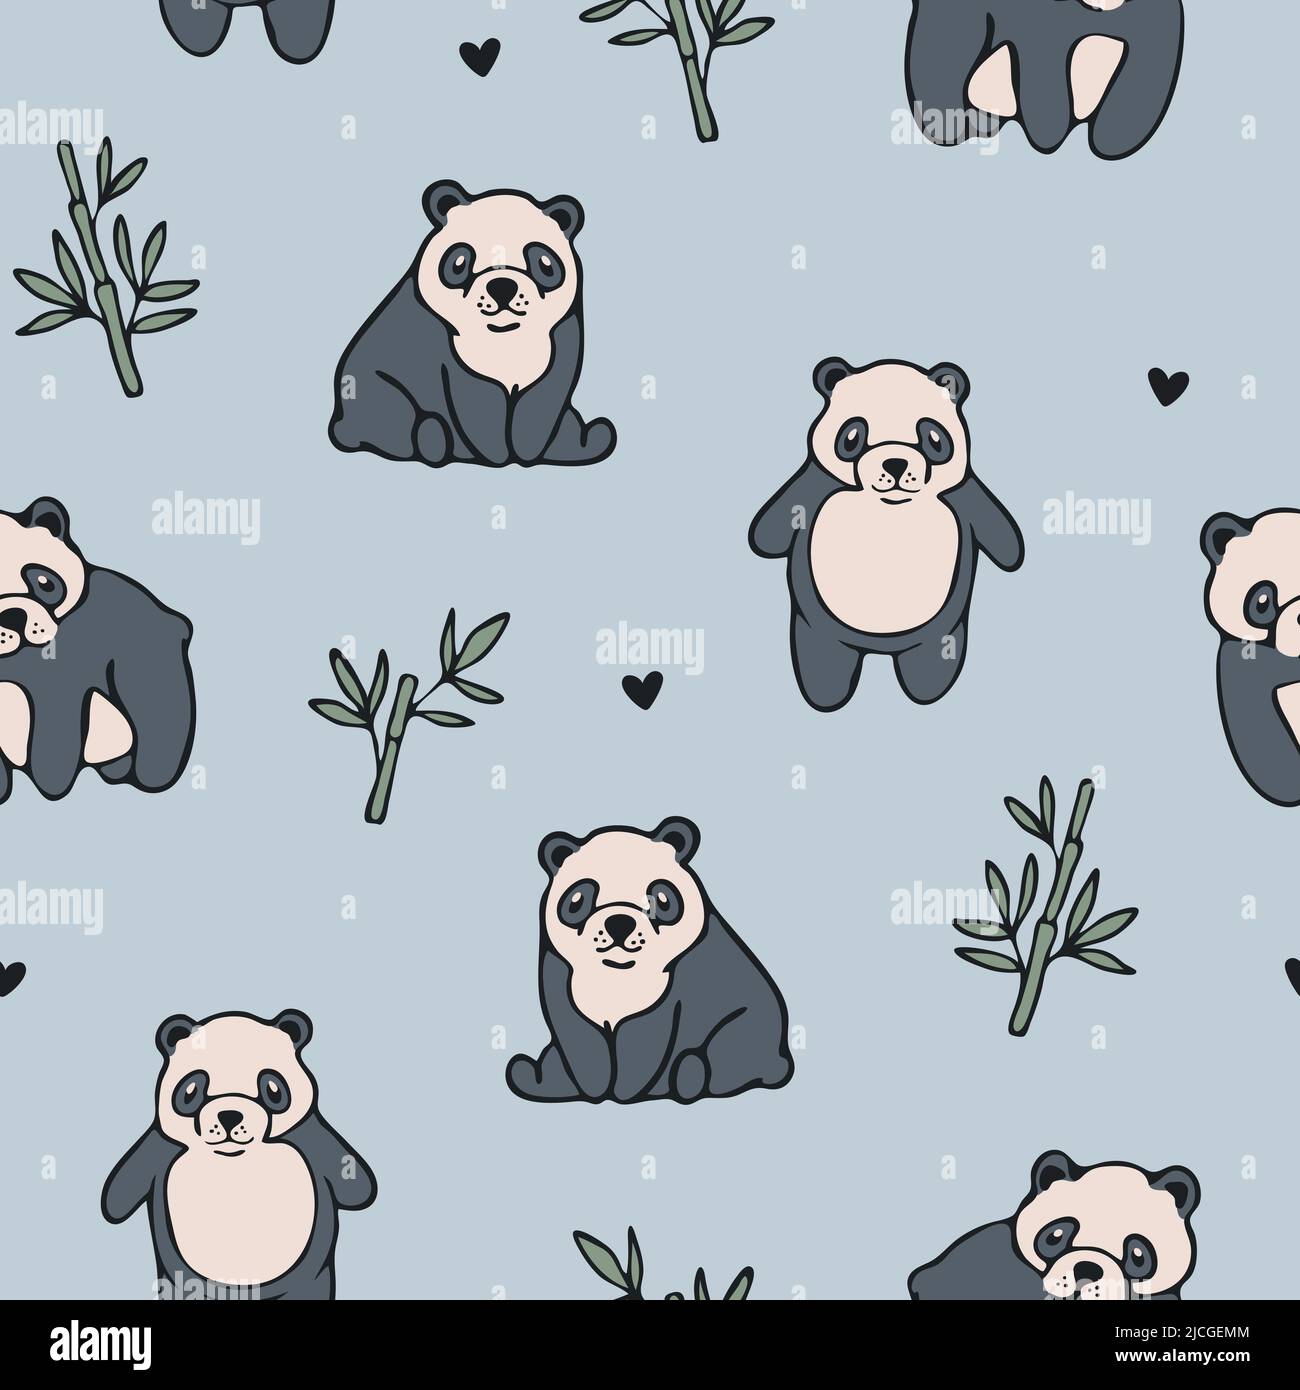 Kawaii Cute Animal Cartoon Wallpaper Cute Cartoon Animal Wallpaper  Wallpapers For Mobile Hd Tumblr Iphone With Quotes Facebook Android Desktop  Of Dolls Cute People  फट शयर